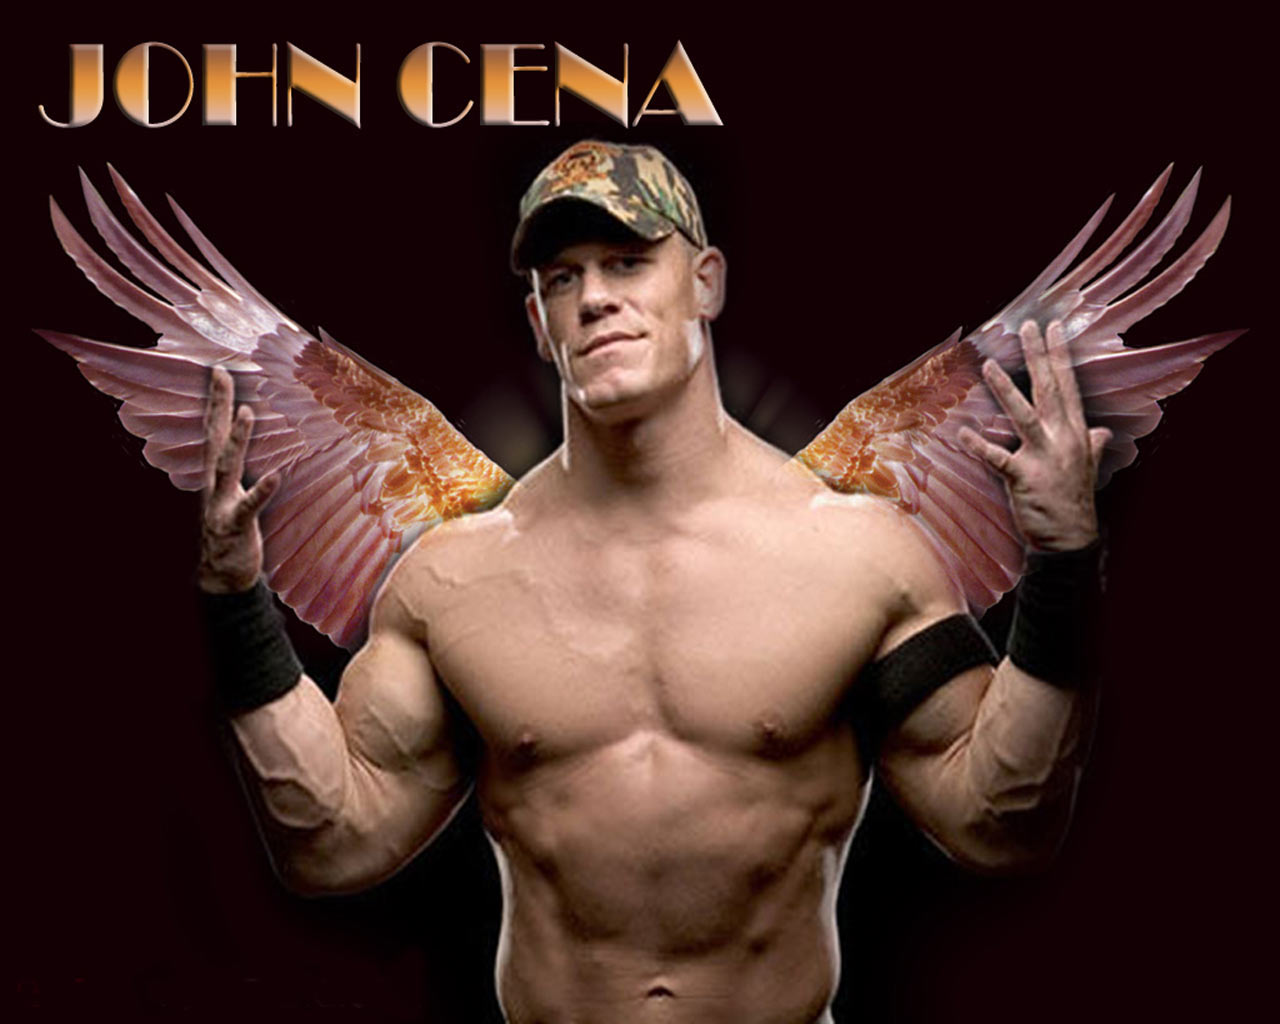 Share With Friends John Cena Wallpaper Which Is Under